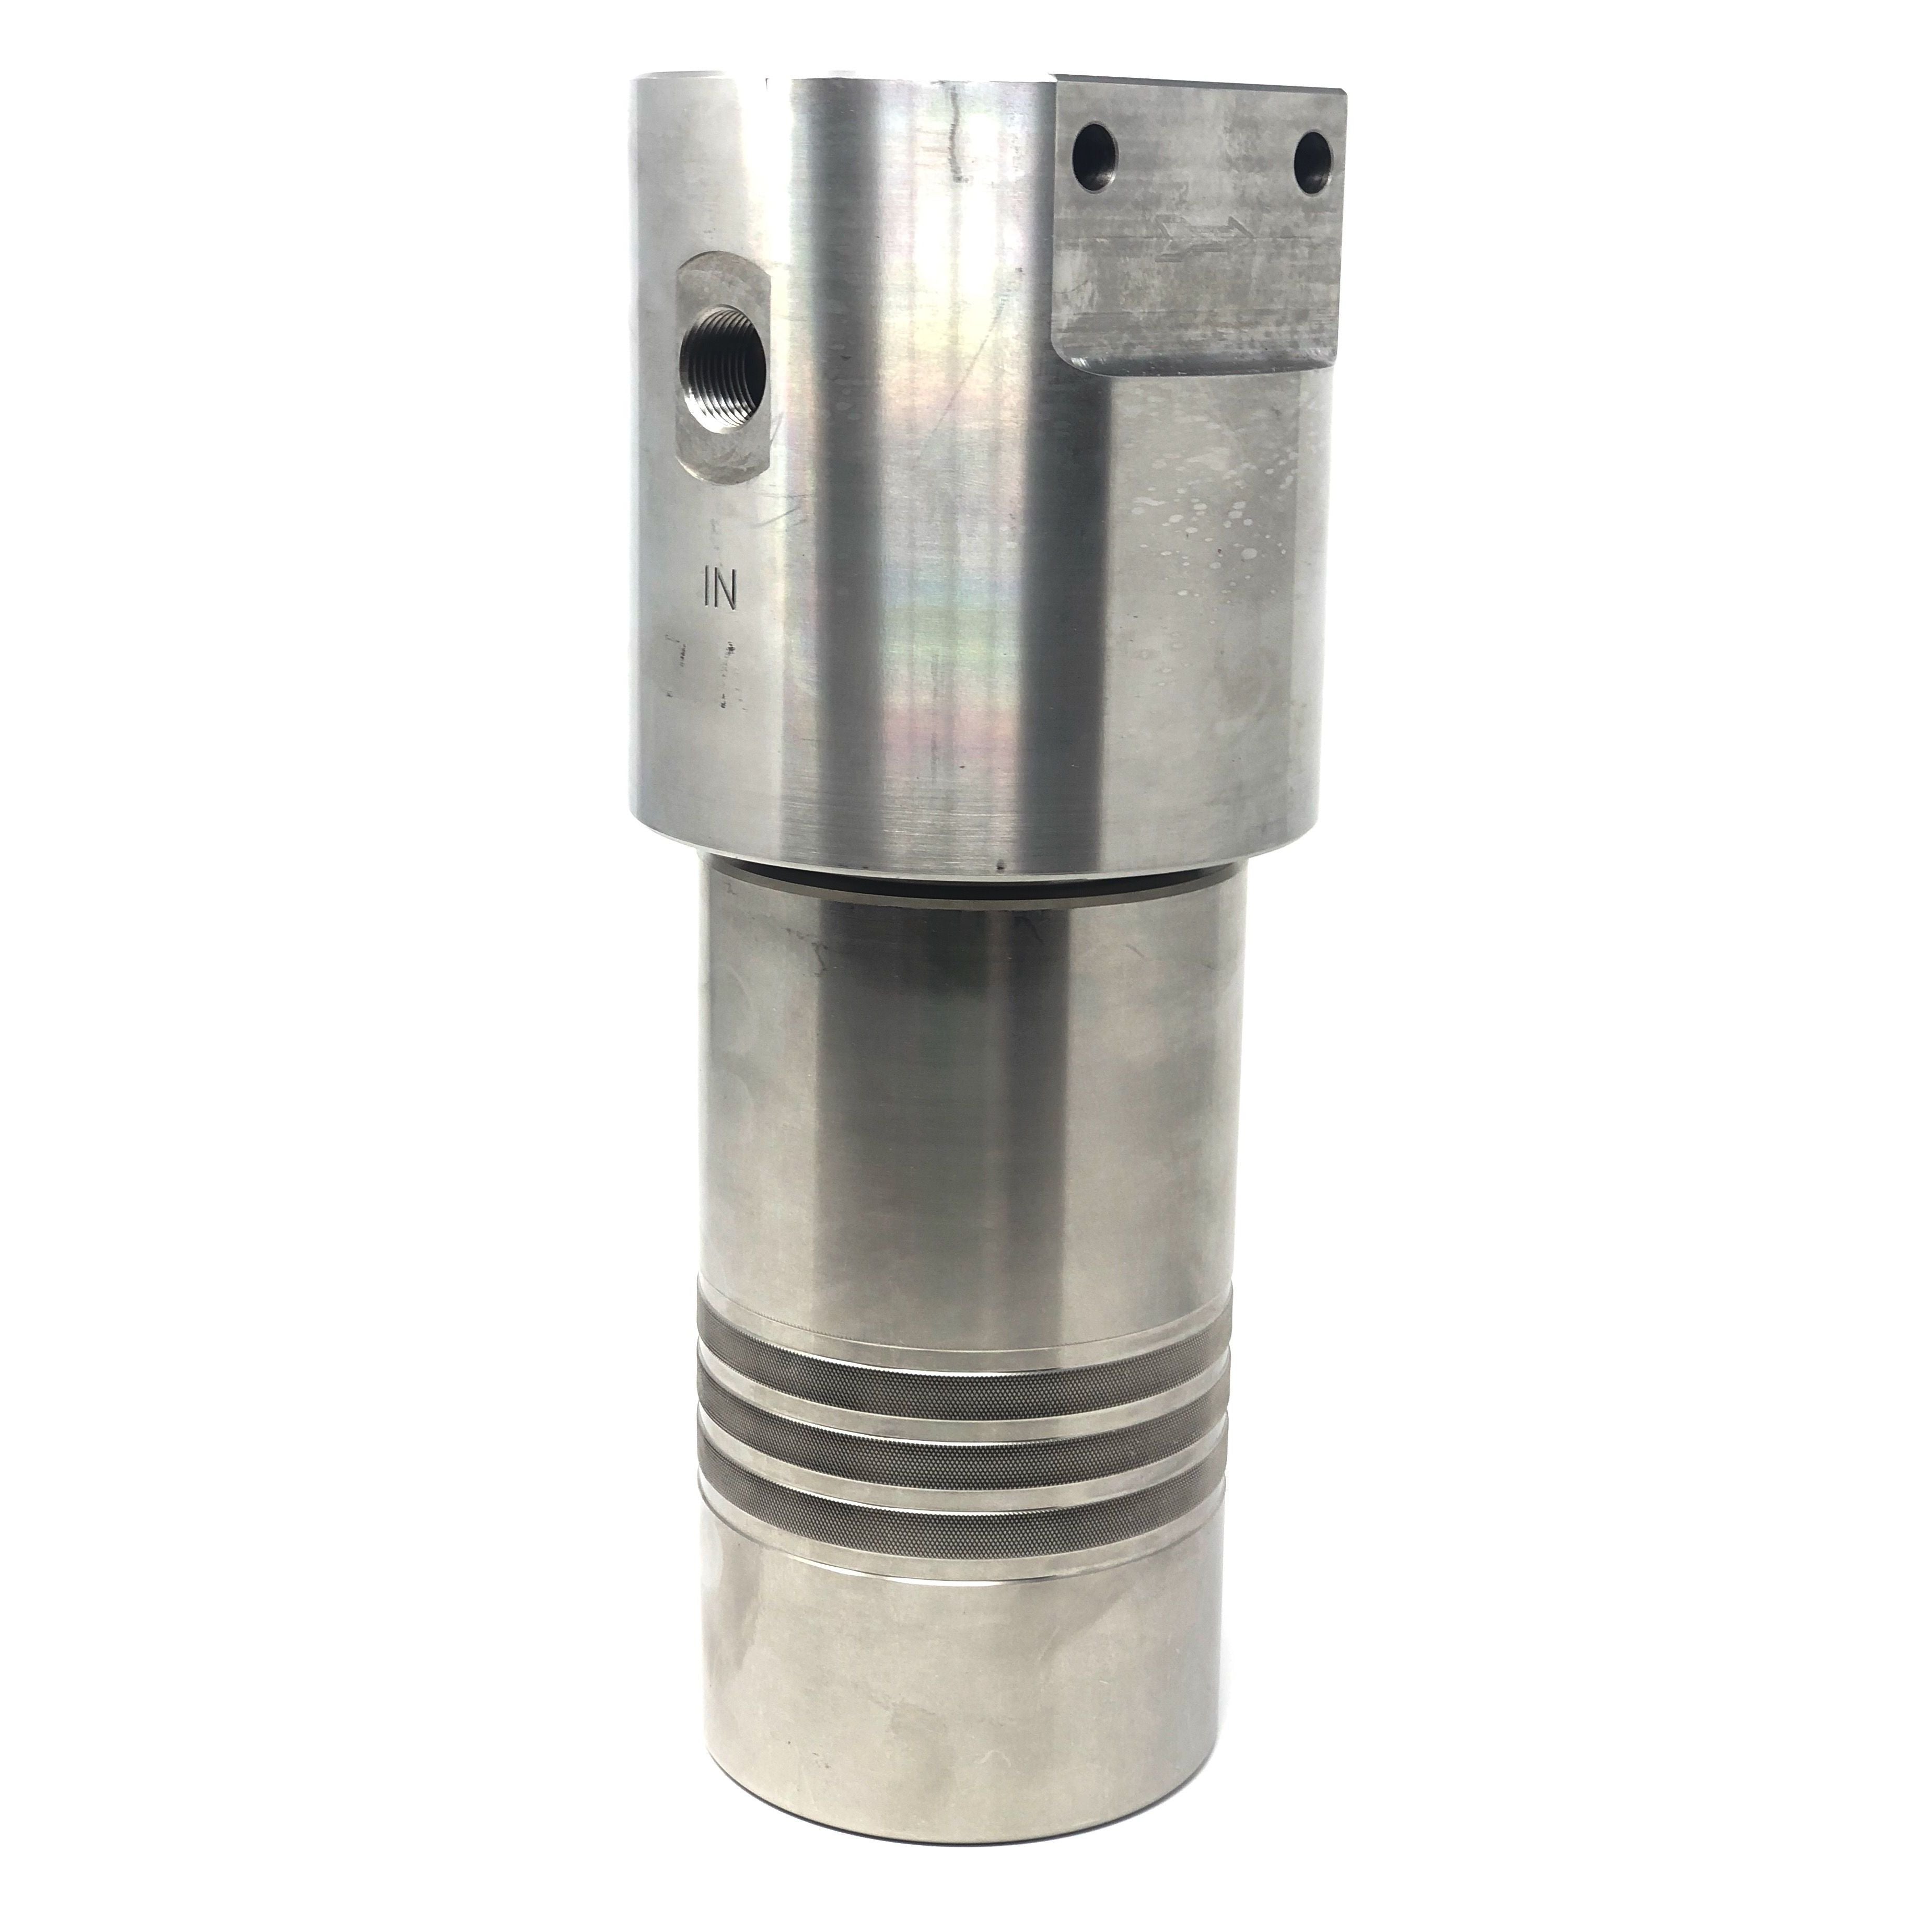 52S-168S-40SEN : Chase Ultra High Pressure Inline Filter, 10000psi, #8 SAE (1/2"), 40 Micron, With Visual Indicator, No Bypass